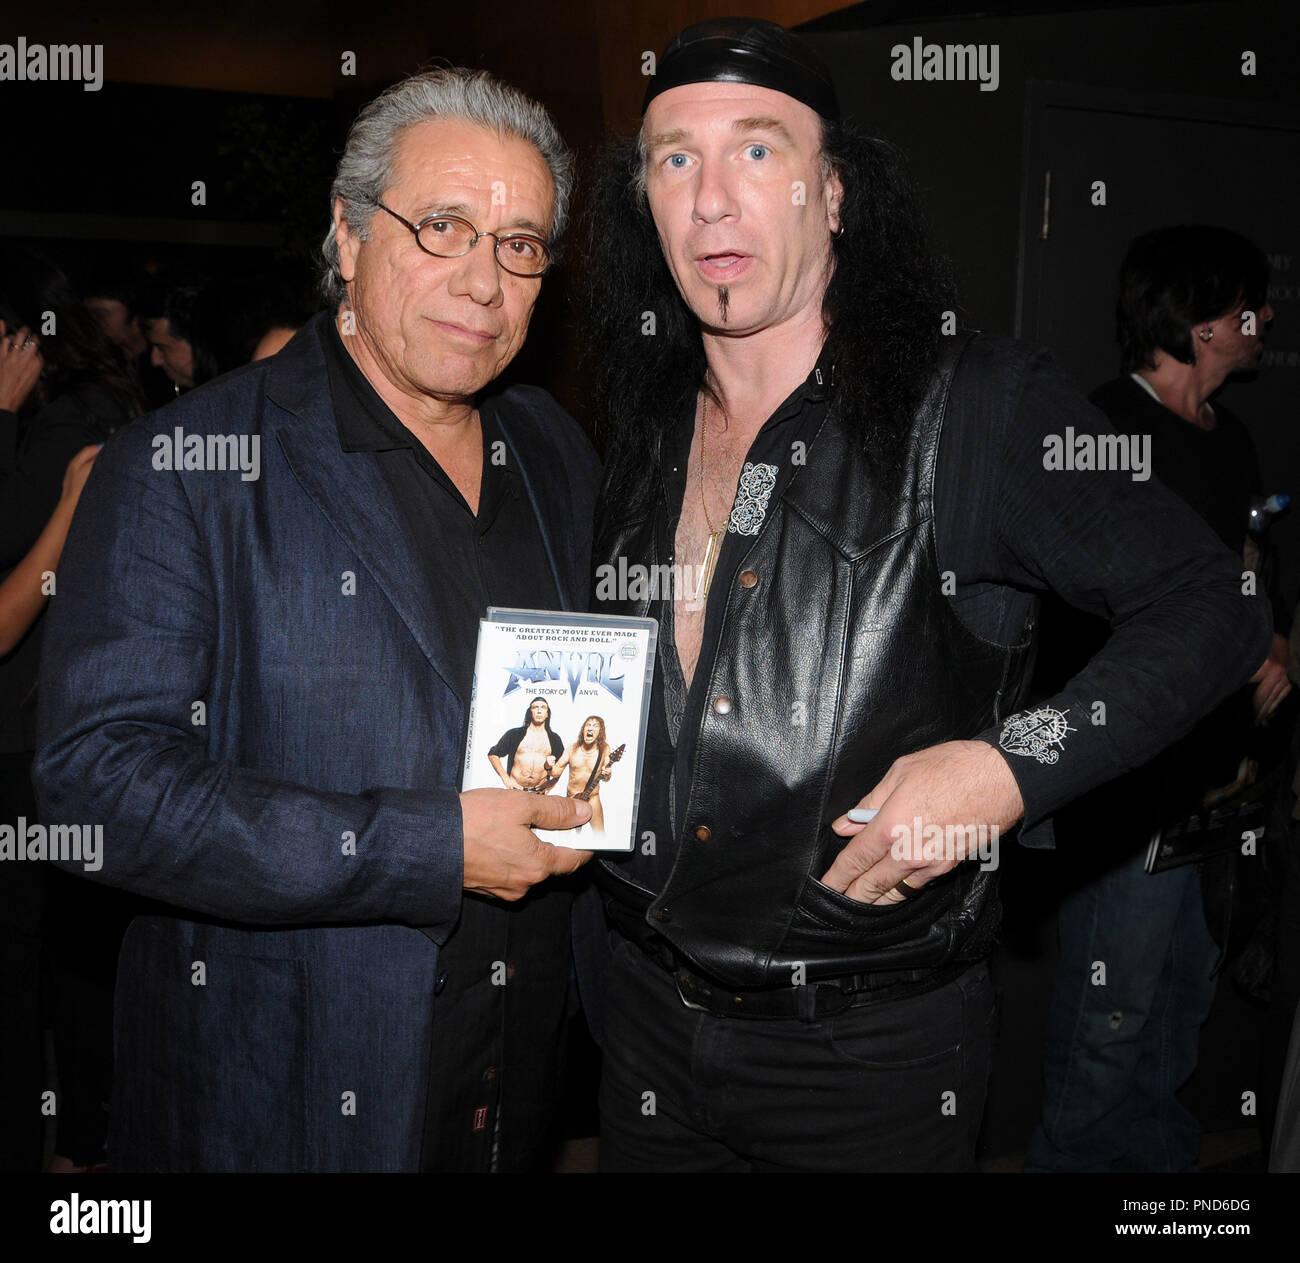 Edward James Olmos and Robb Reiner of Anvil during the reception of the DVD release of 'Anvil The Story of Anvil' held at the WGA in Beverly Hills, CA on Thursday, October 8, 2009. Photo by Richard Soria/ PRPP /PictureLux File Reference # EdwardJamesOlmosReiner01 10809PRPP  For Editorial Use Only -  All Rights Reserved Stock Photo